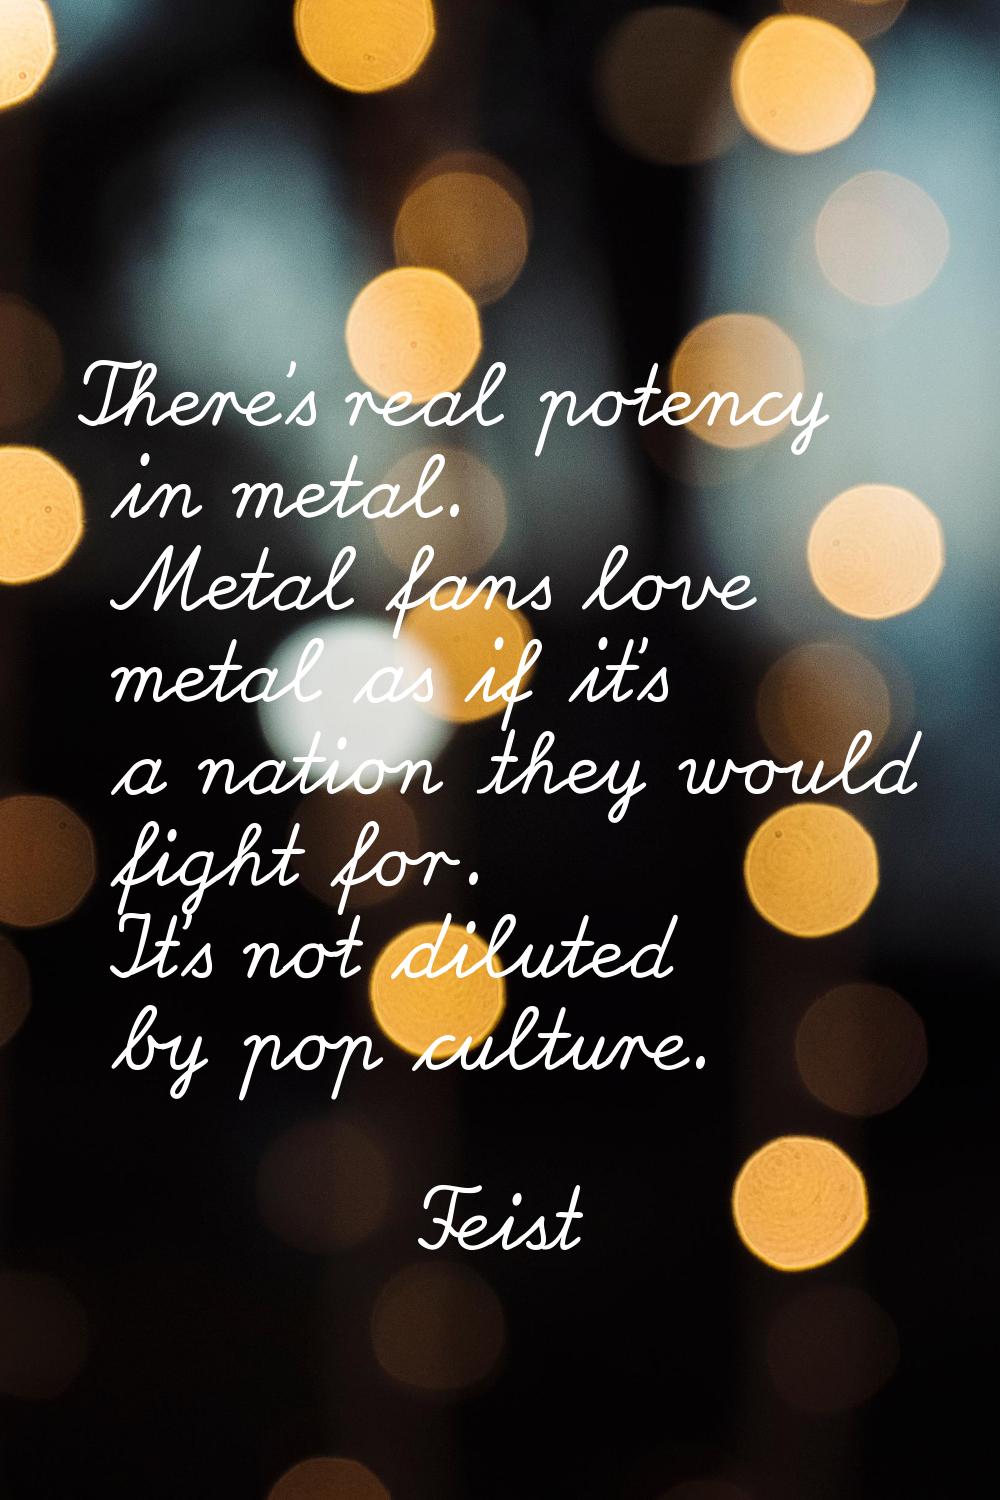 There's real potency in metal. Metal fans love metal as if it's a nation they would fight for. It's